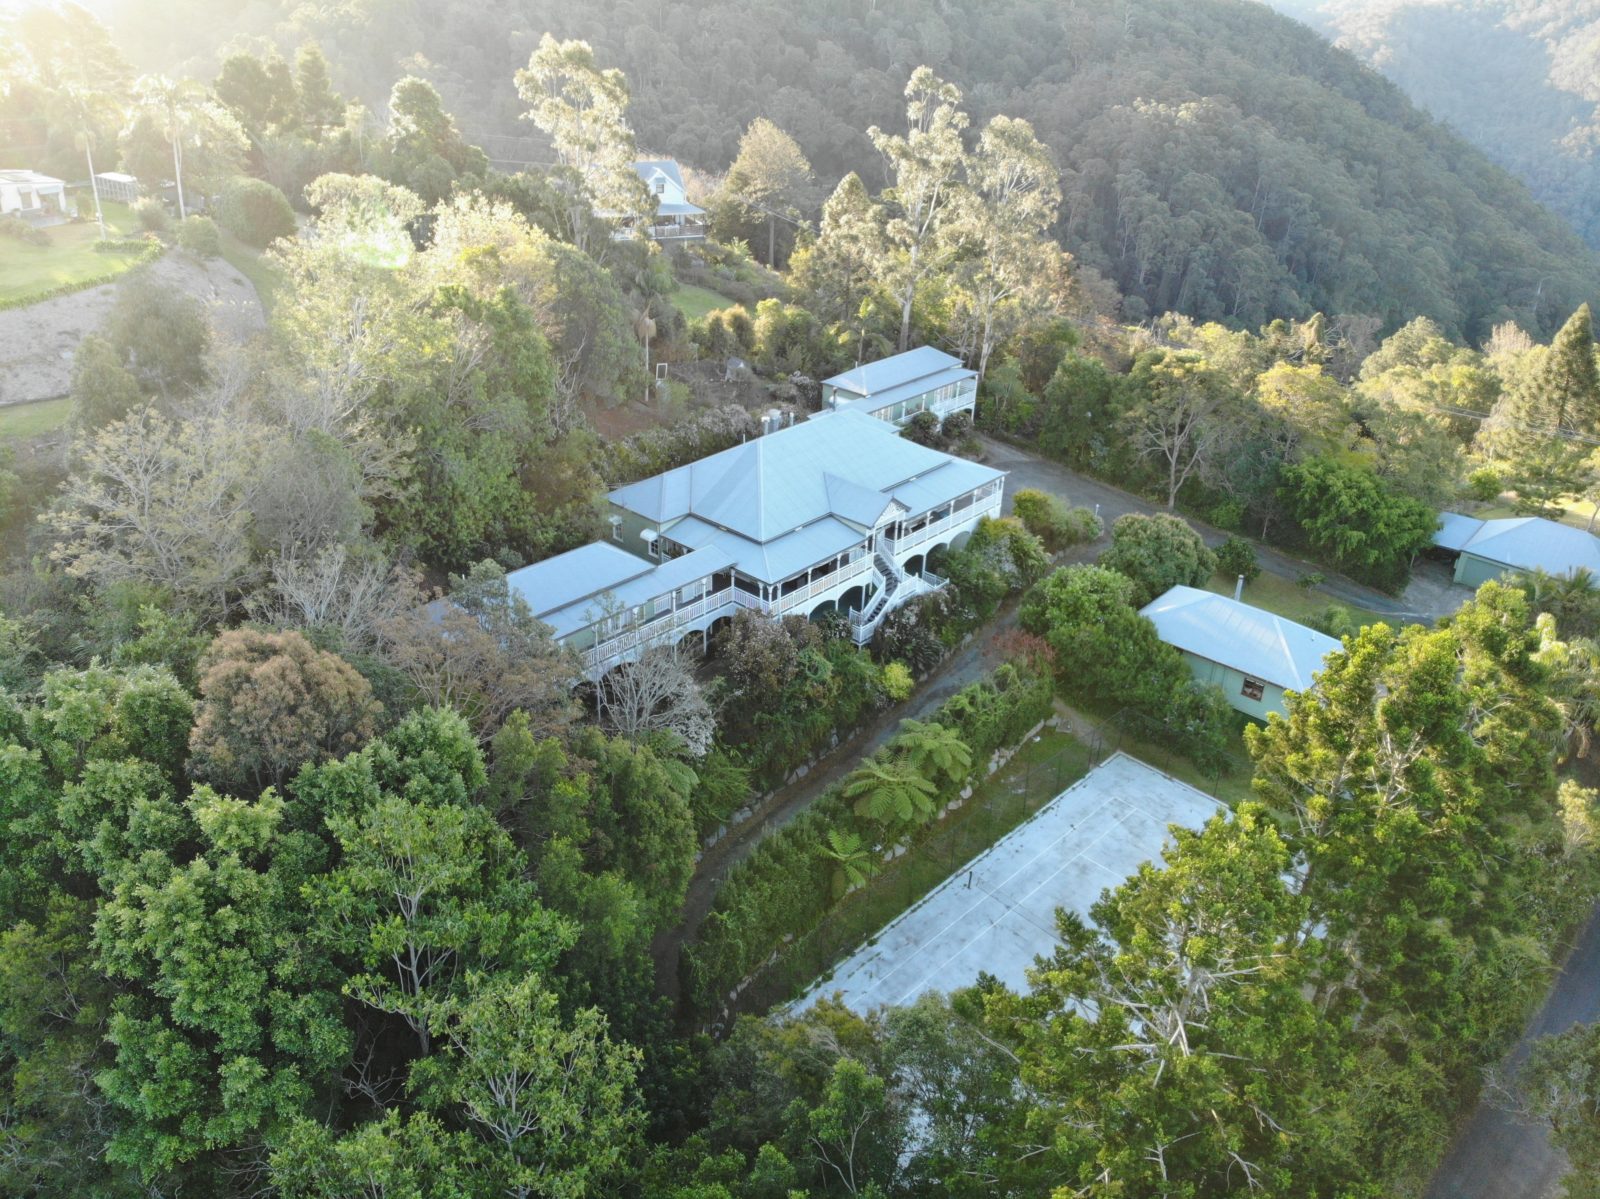 Nestled in the beautiful rainforests of Mount Glorious